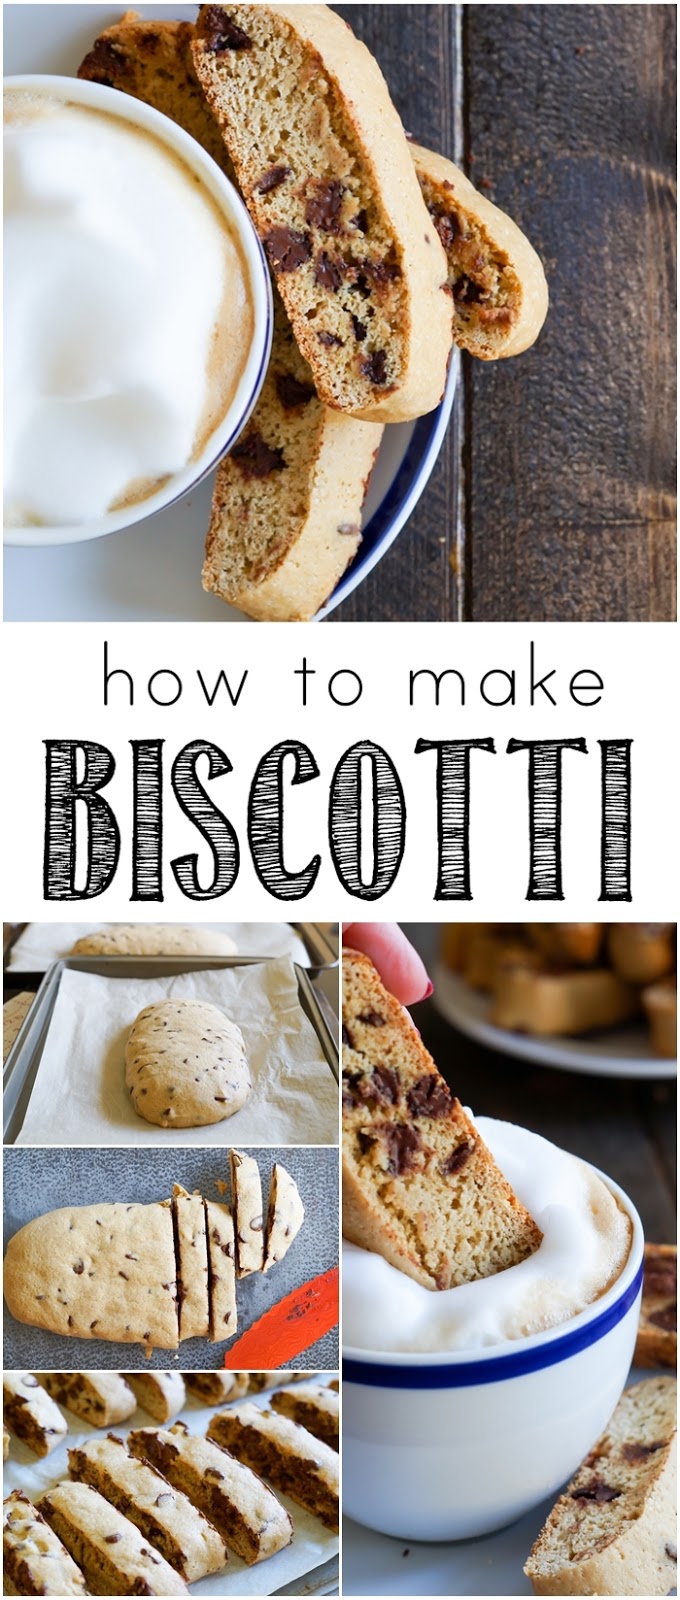 The Pioneer Woman Food & Friends Latest Post: How to Make Biscotti